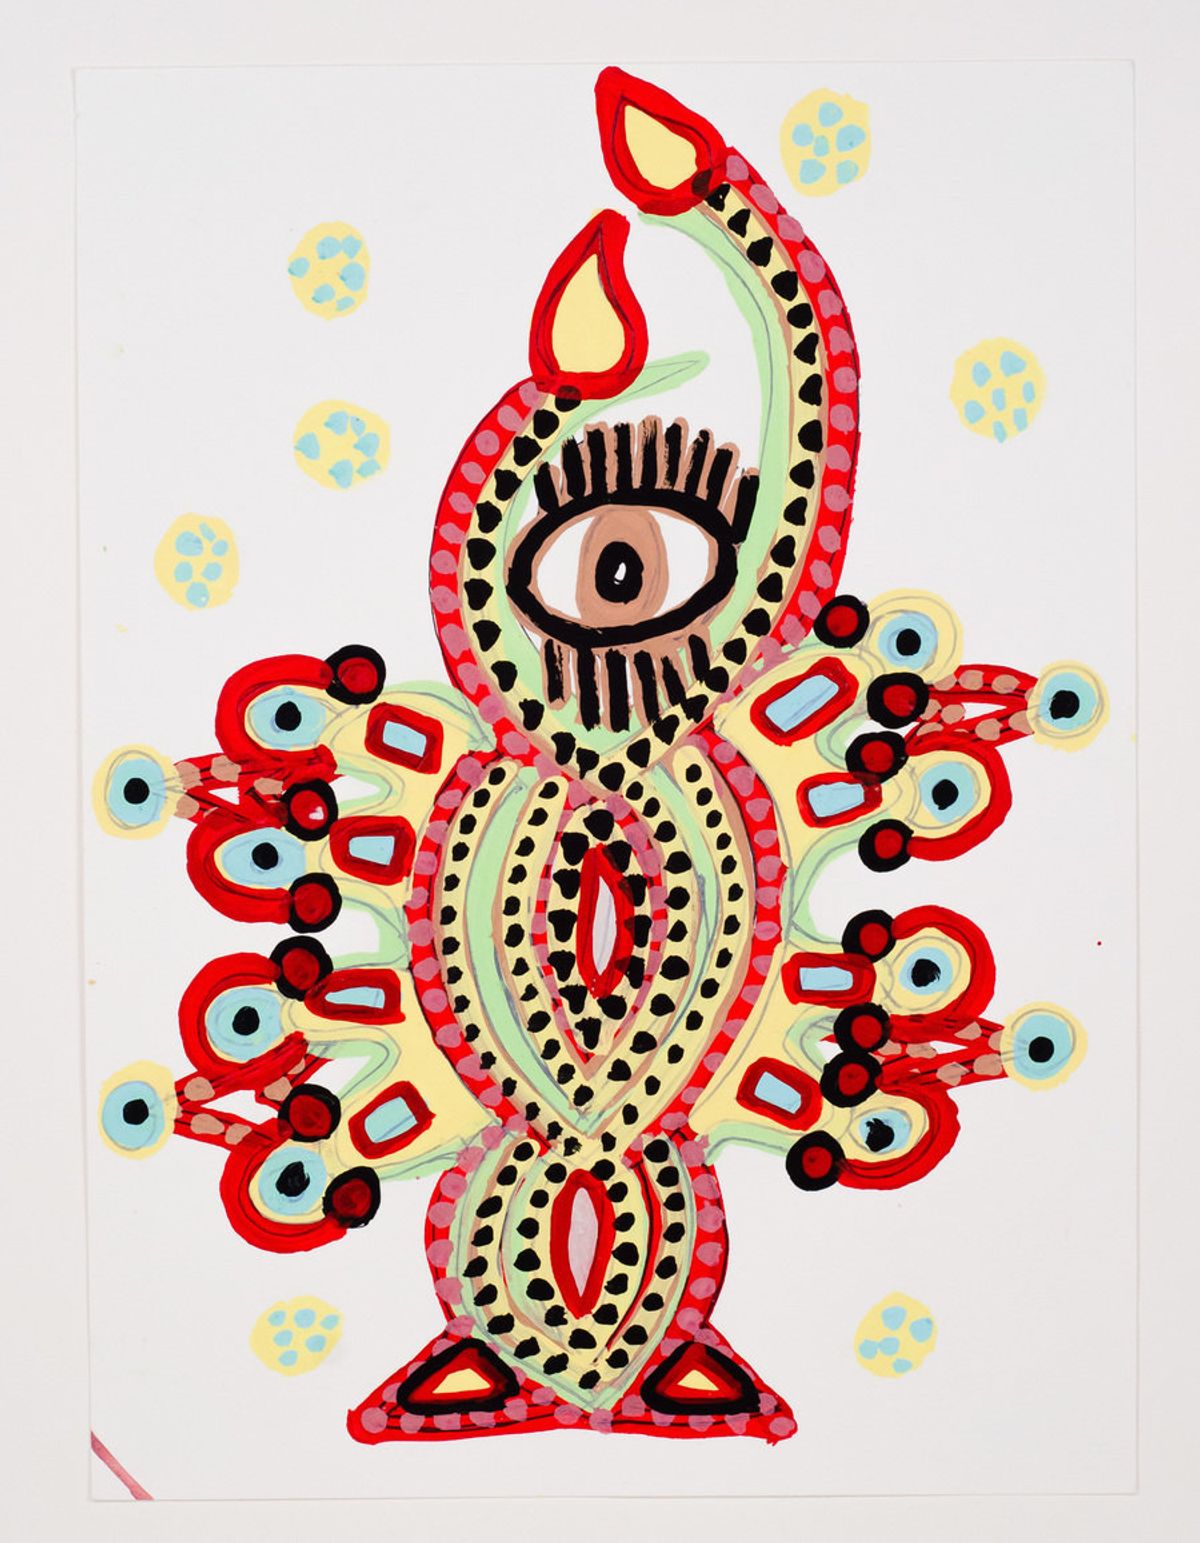 Fleisher/Ollman gallery shows works by artists like Queen Nancy Bell at the 2019 Outsider Art Fair in New York. Courtesy of Fleisher/Ollman